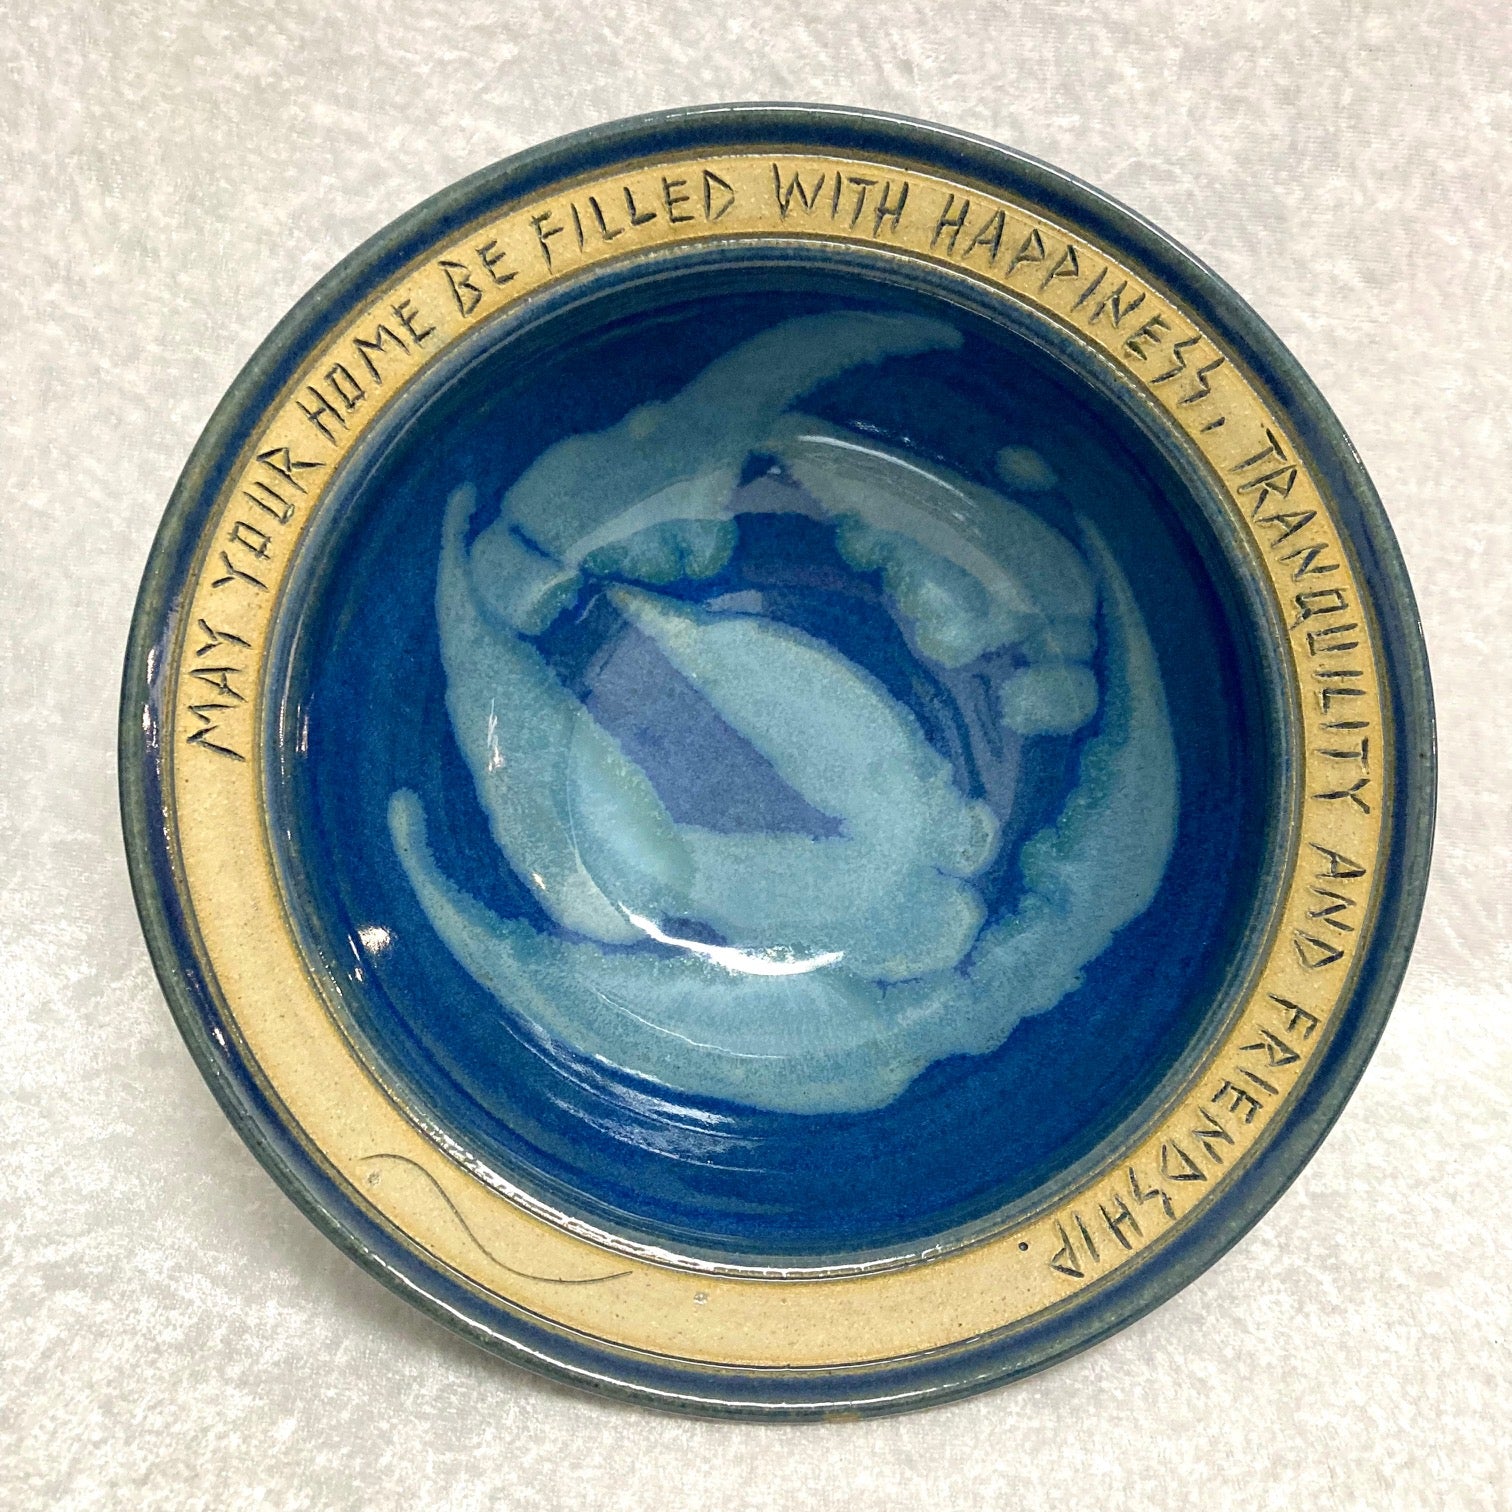 Housewarming Bowl - "May Your Home Be Filled"